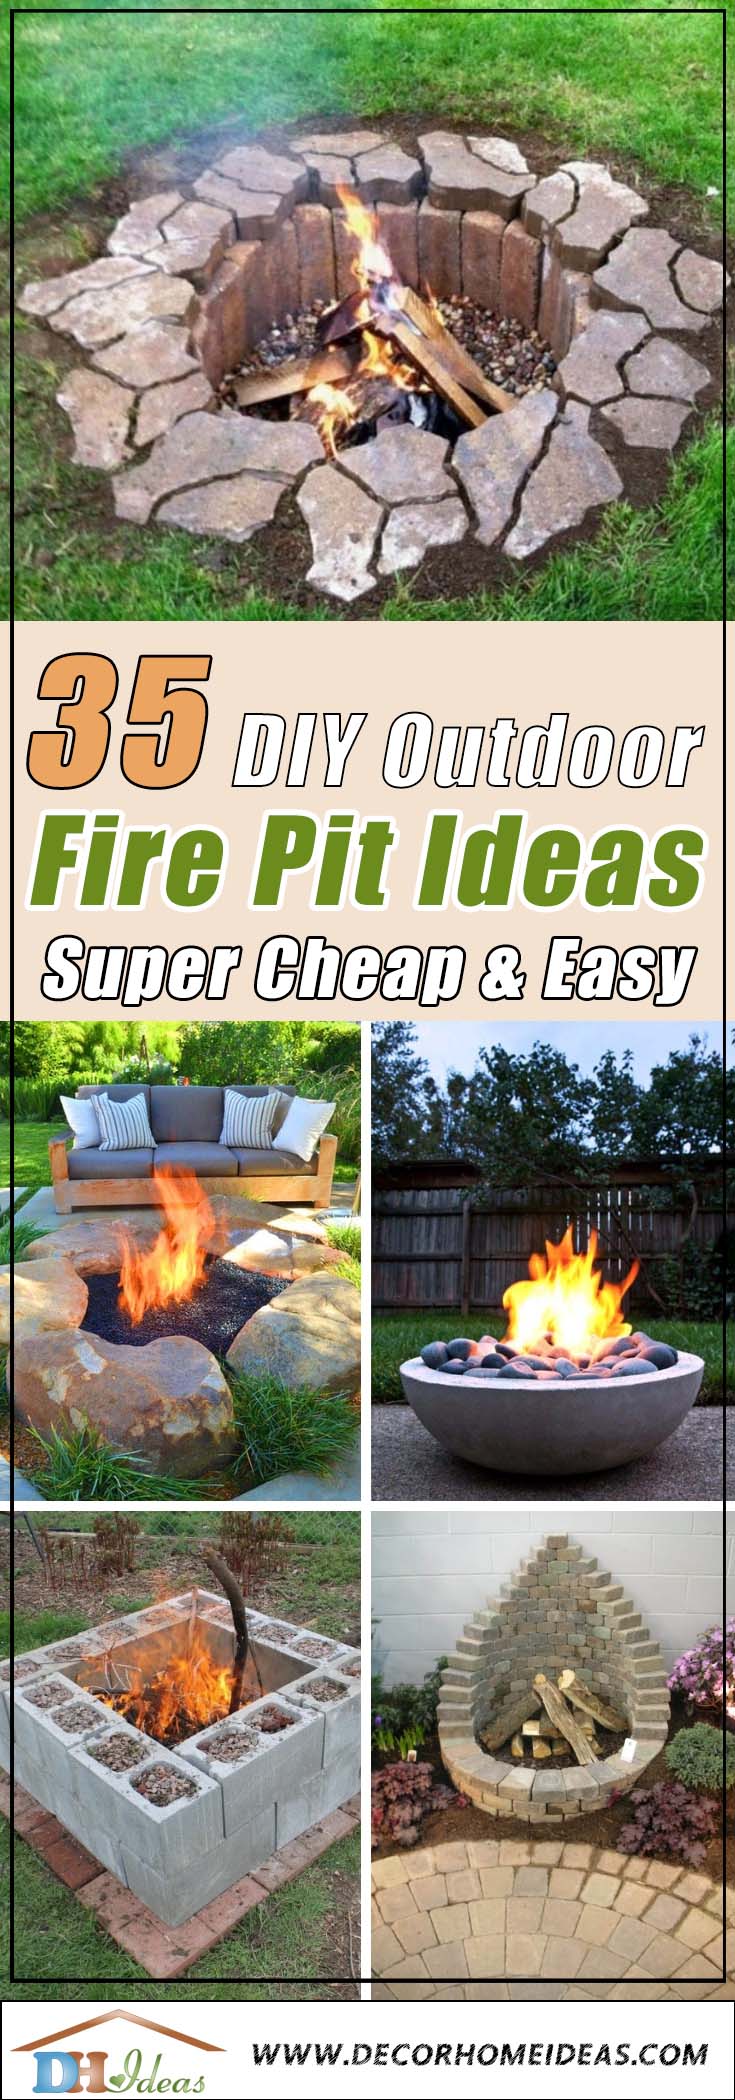 35 Easy To Do Fire Pit Ideas And, How To Make Diy Fire Pits